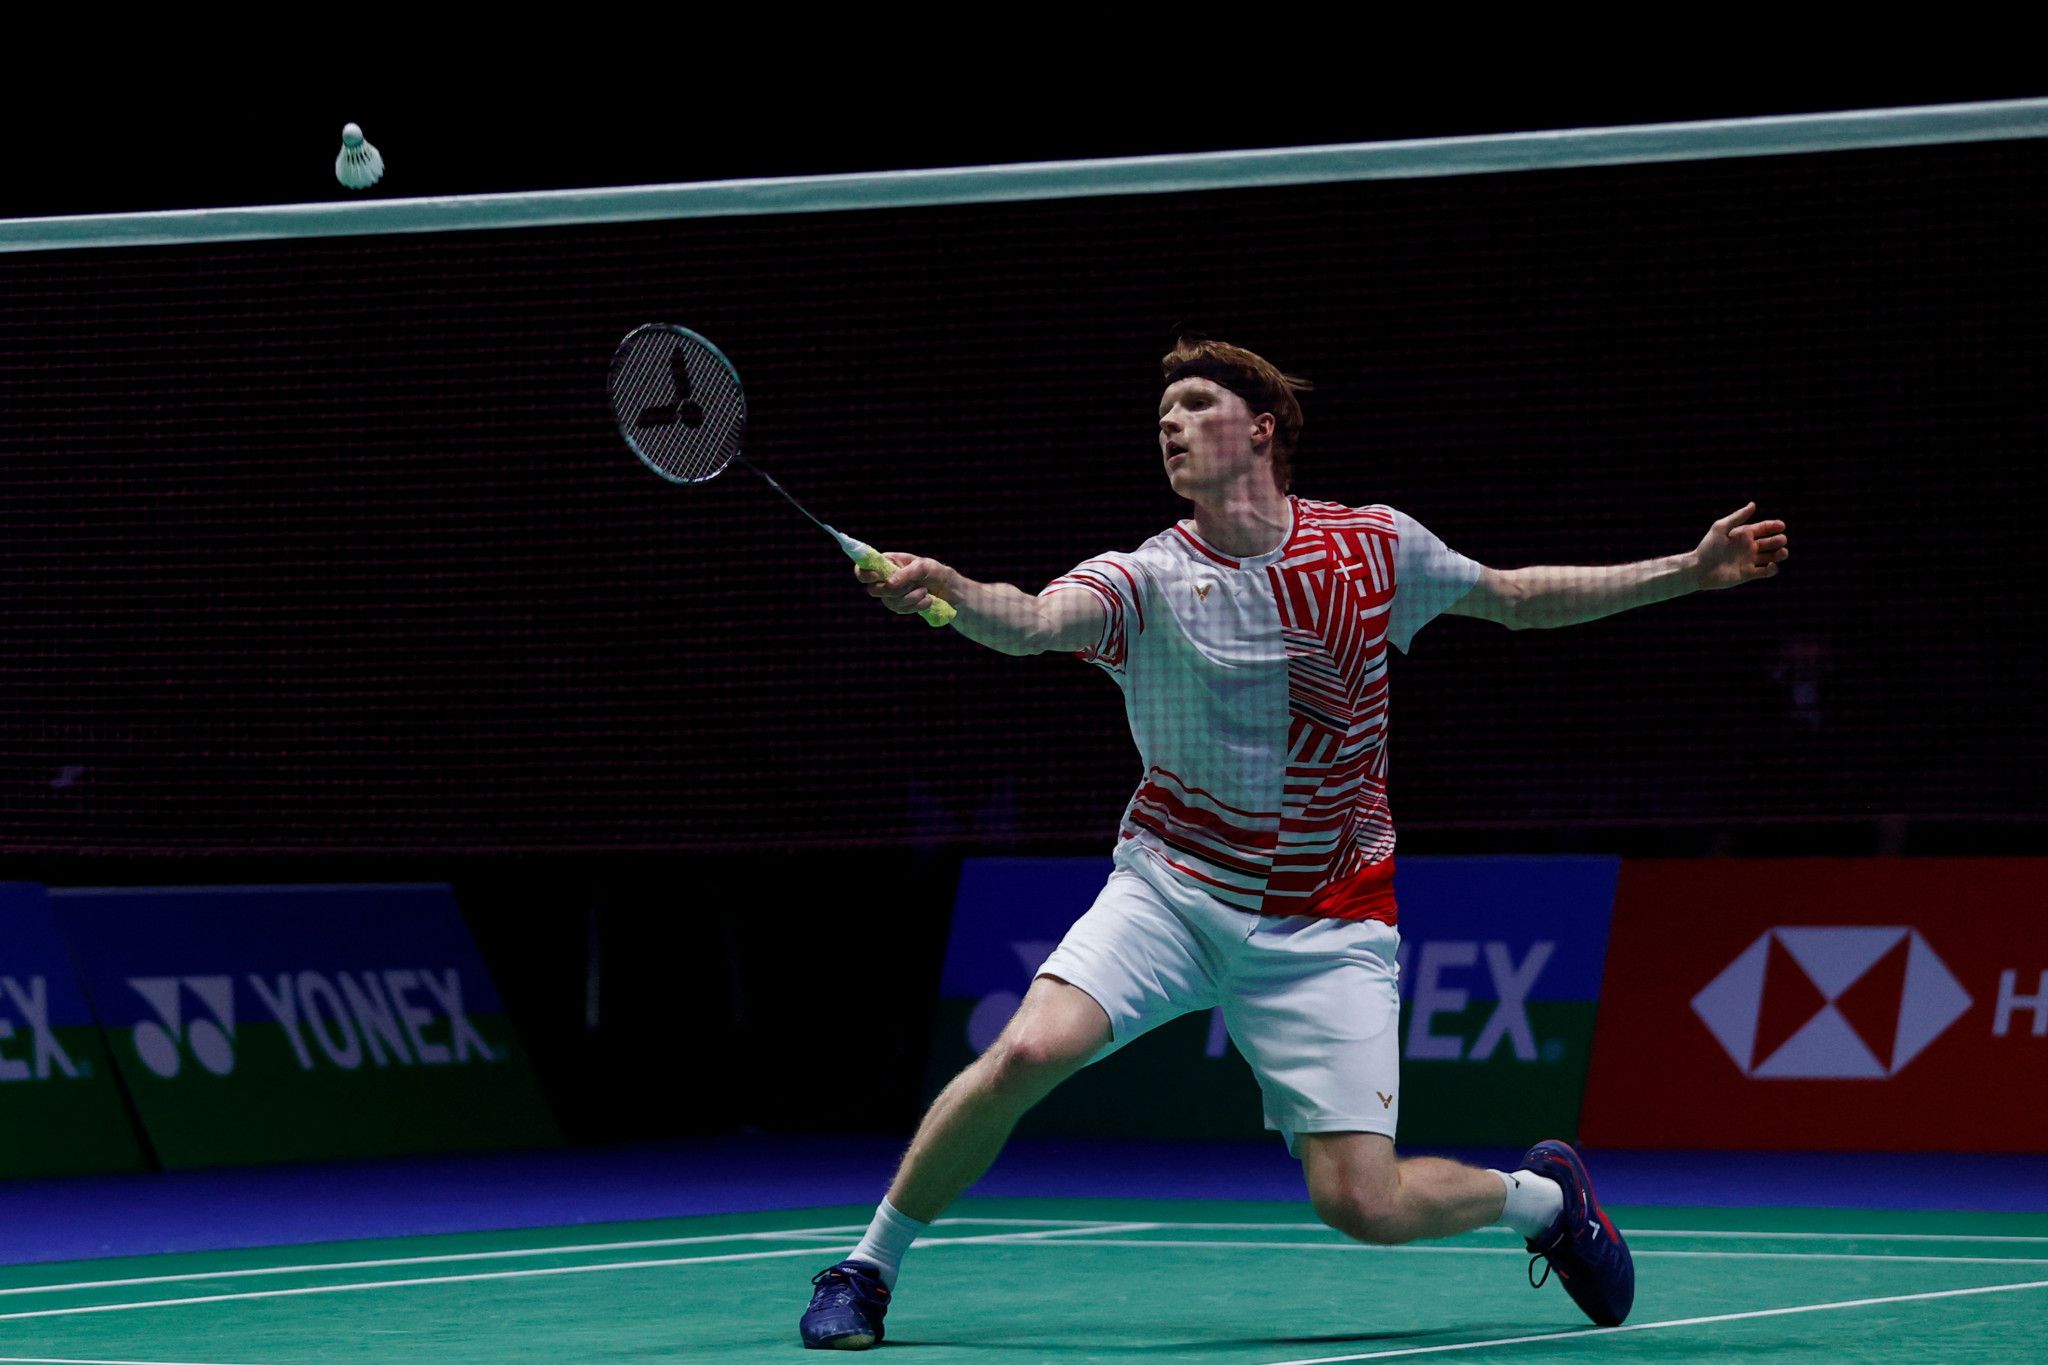 Badminton Europe's Centre of Excellence has been a training base for some of the world's best players since 2017 ©Getty Images